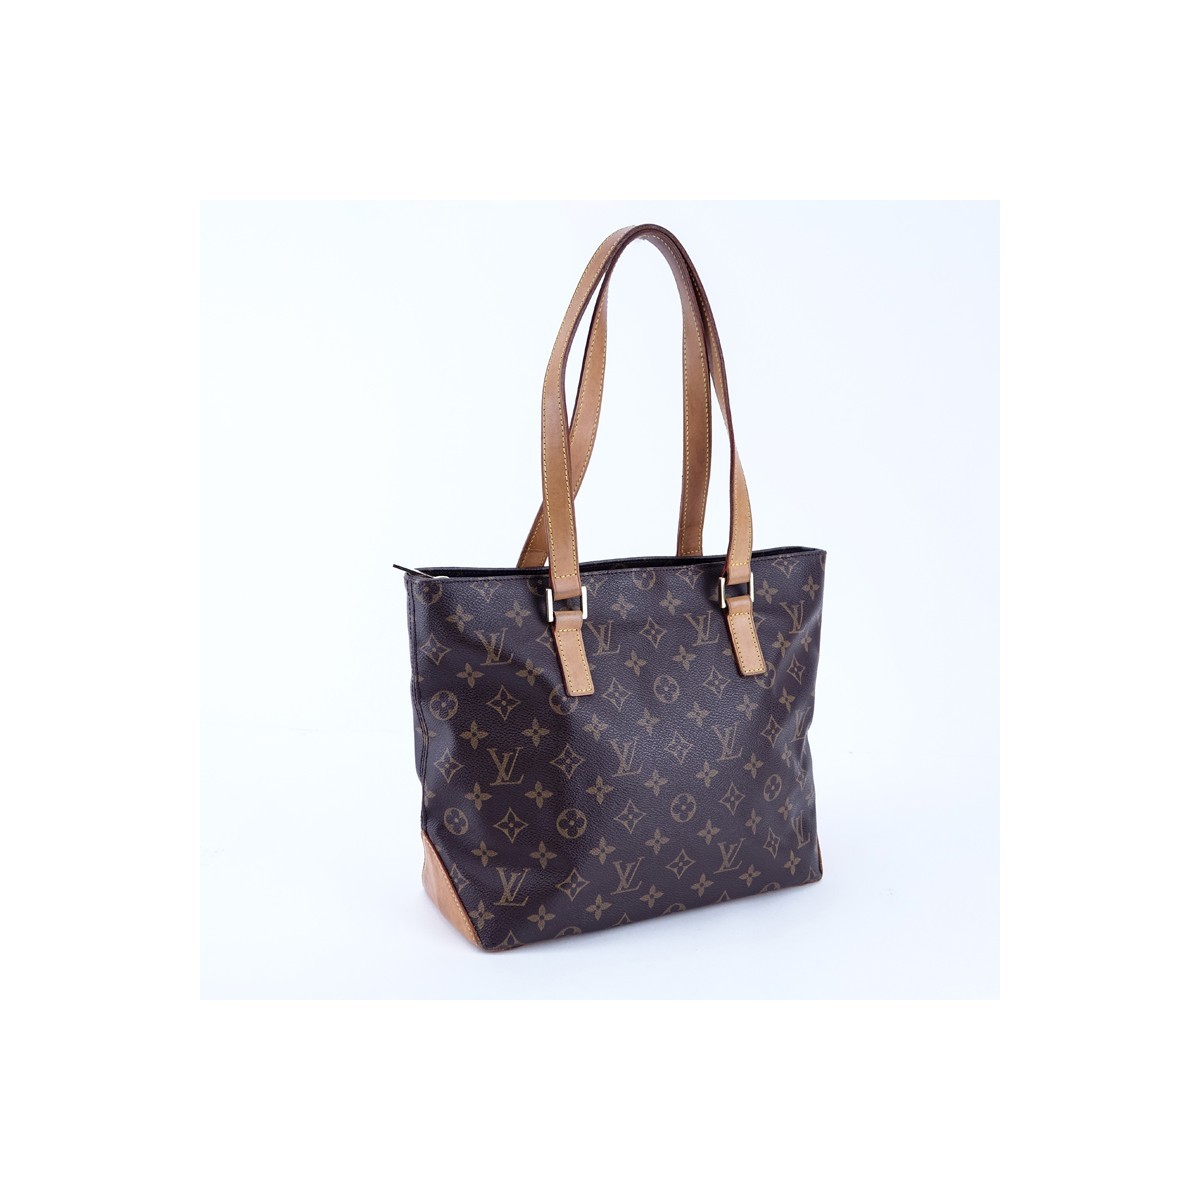 Louis Vuitton Brown Monogram Coated Canvas Cabas Piano Bag. Golden brass hardware, brown interior with zipper and patch pockets, vachetta straps.